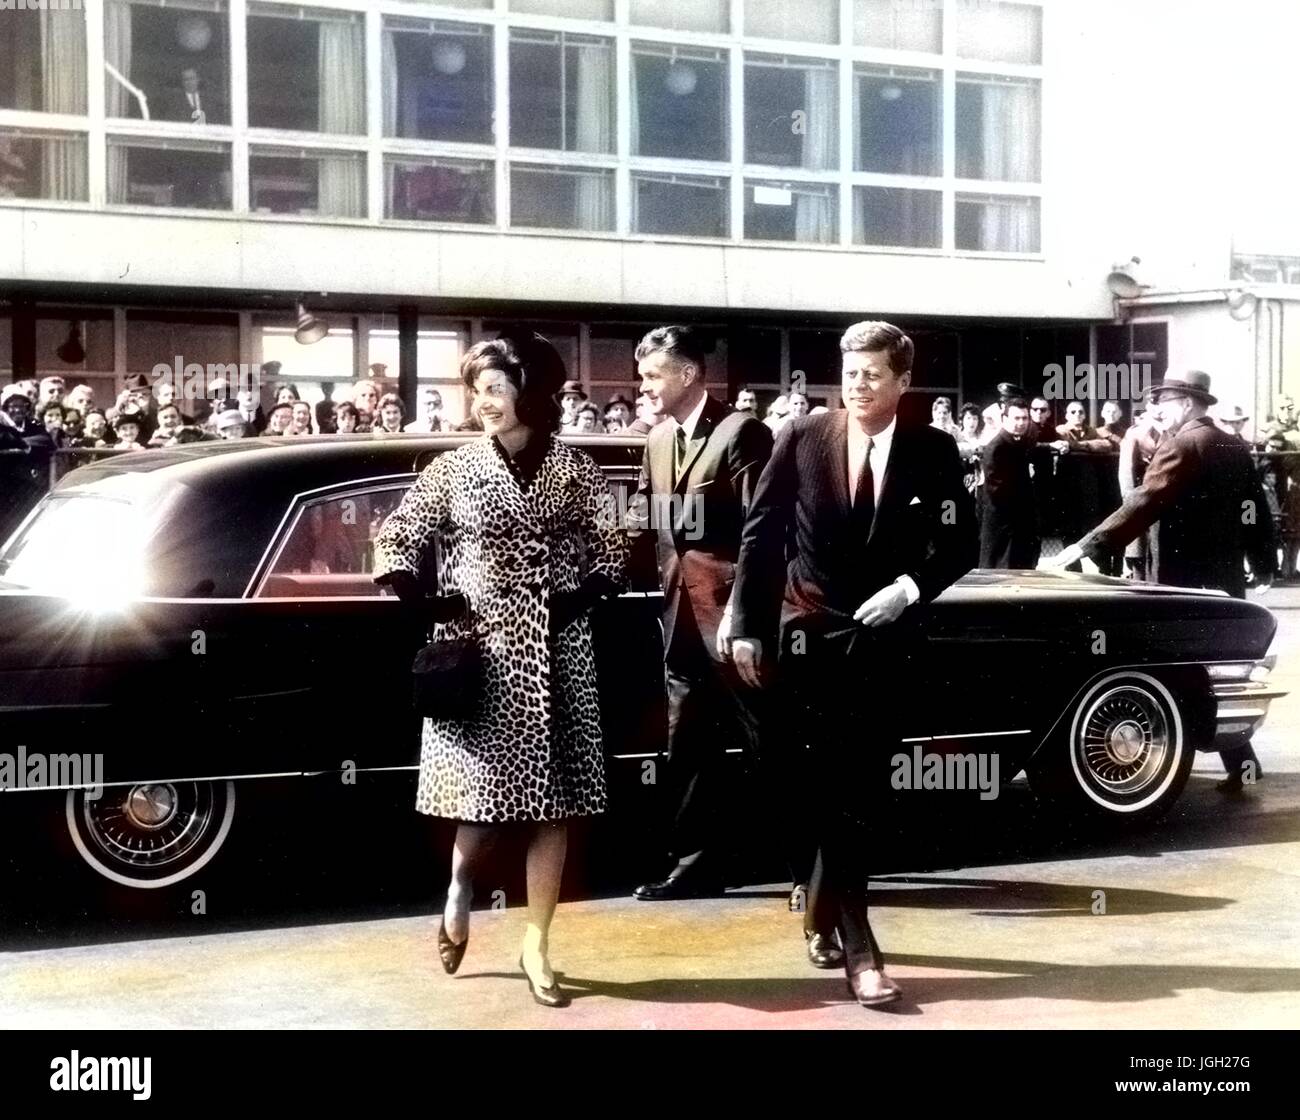 US President John F Kennedy and Jacqueline Kennedy exit an automobile, 1961. Courtesy Abbie Row/National Parks Service. Note: Image has been digitally colorized using a modern process. Colors may not be period-accurate. Stock Photo